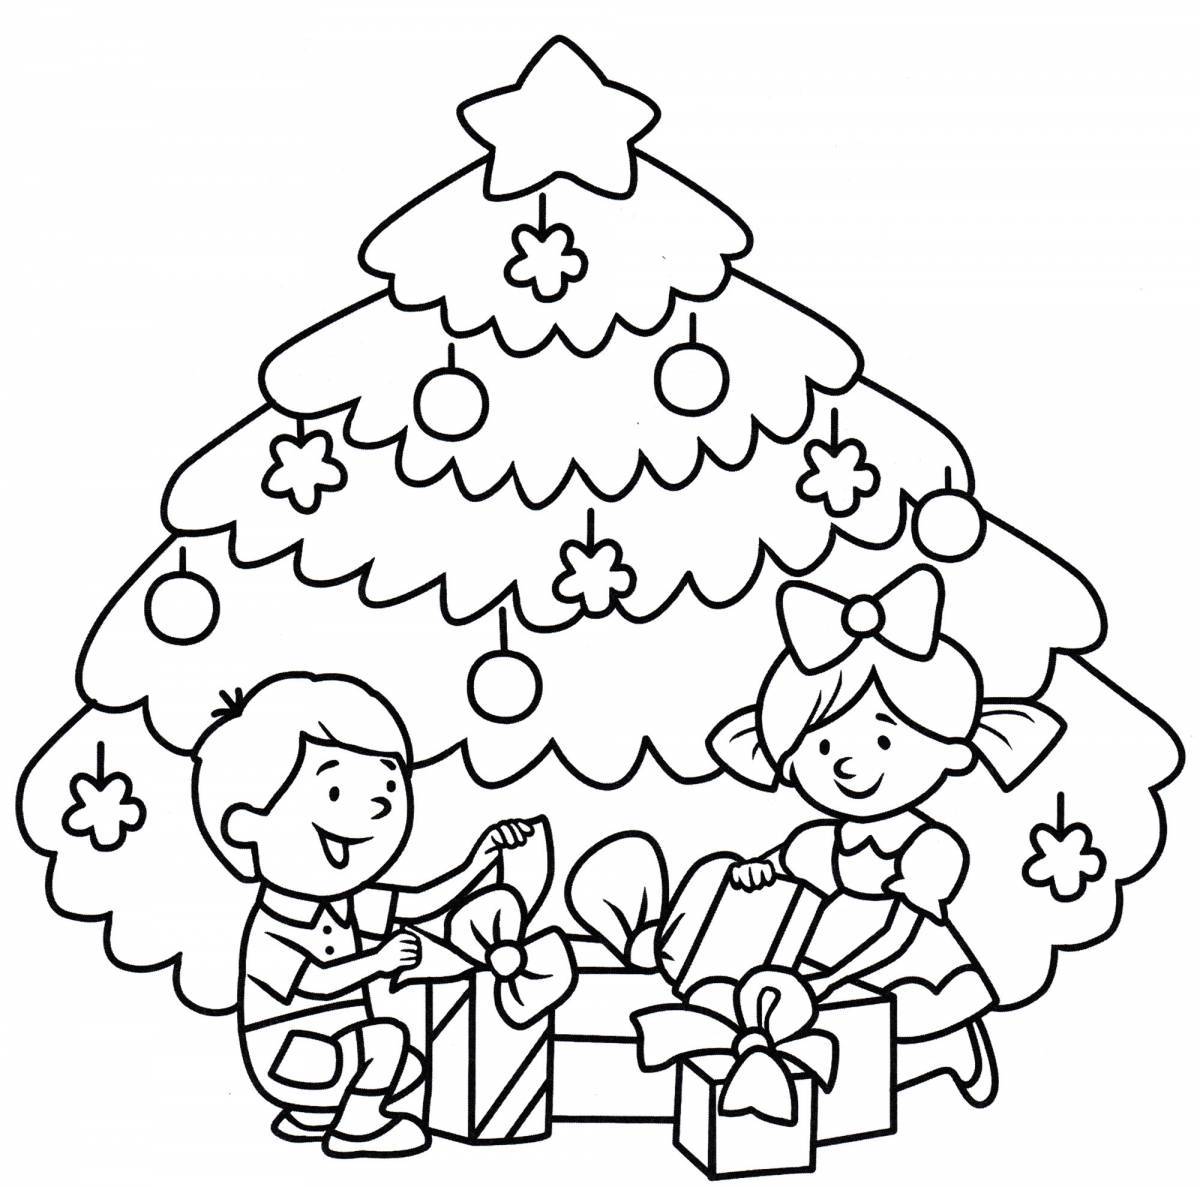 Exquisite Christmas coloring book for kids